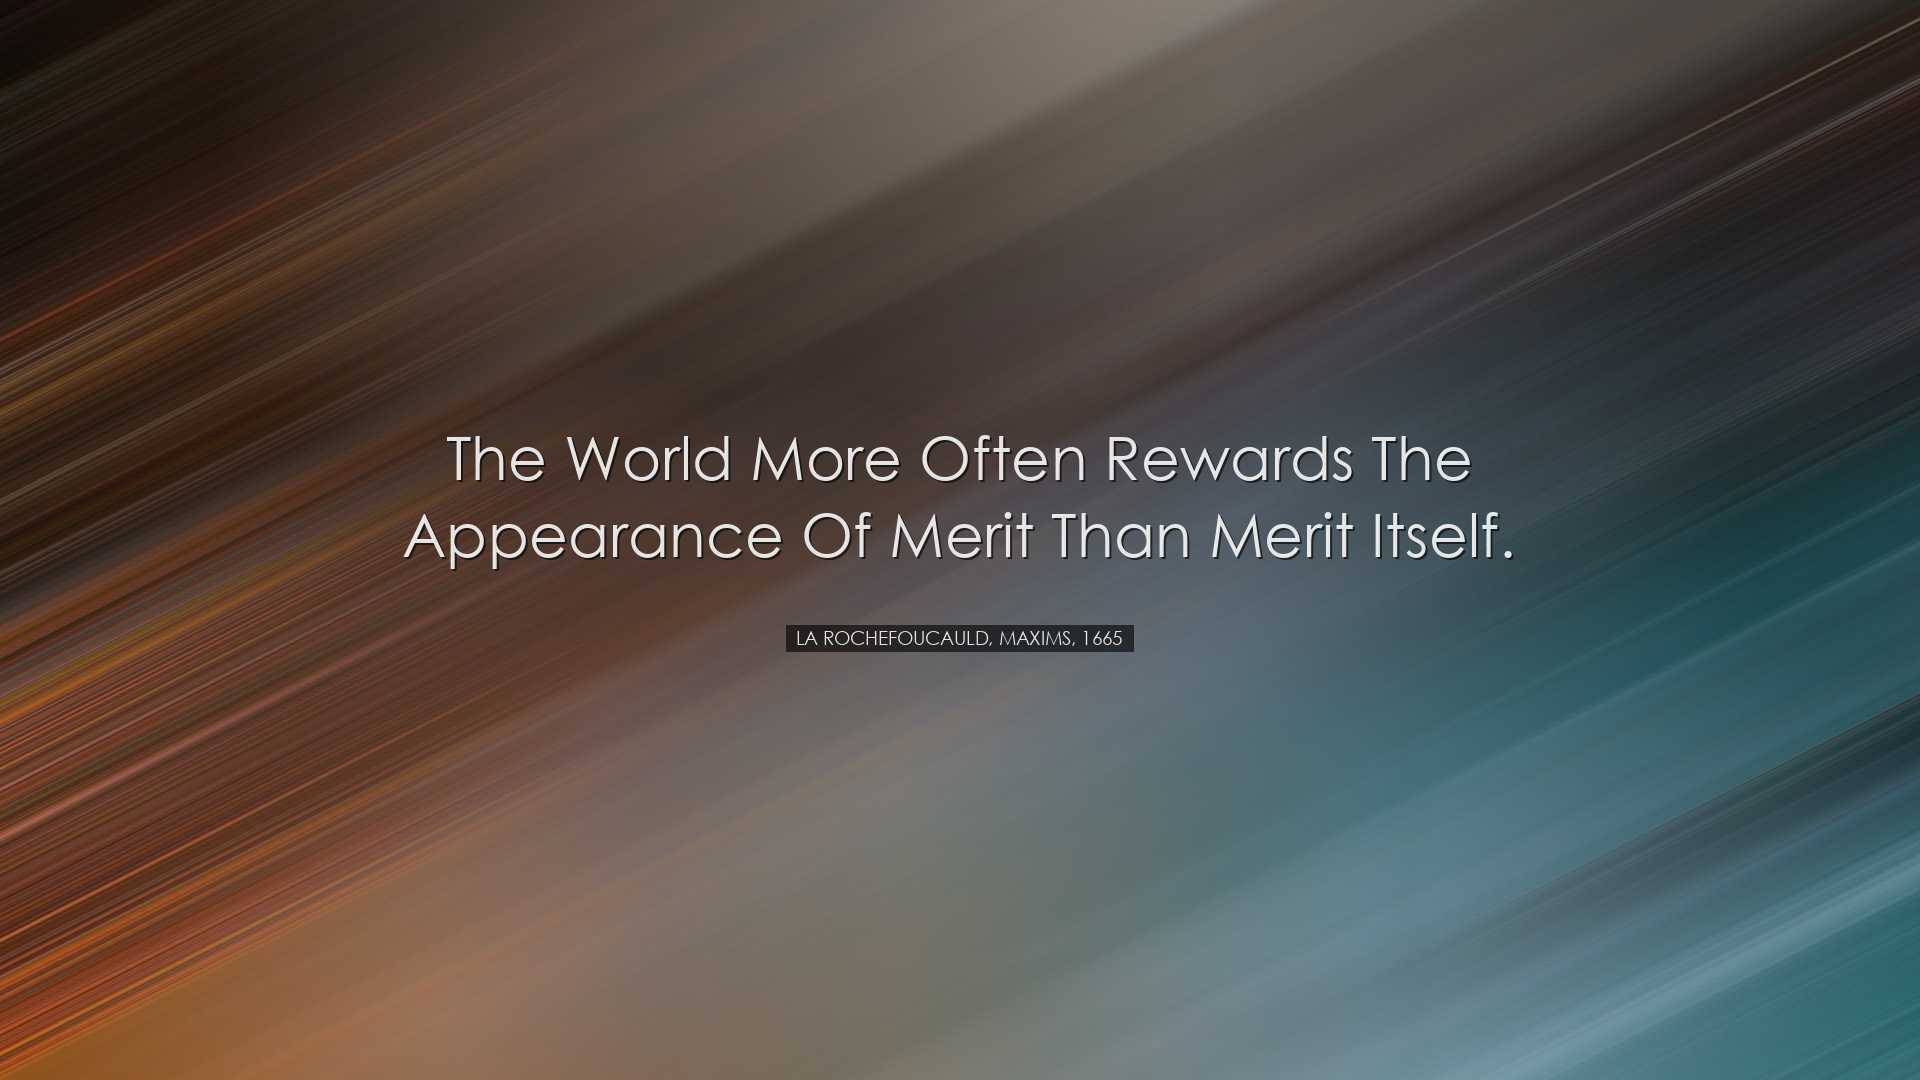 The world more often rewards the appearance of merit than merit it